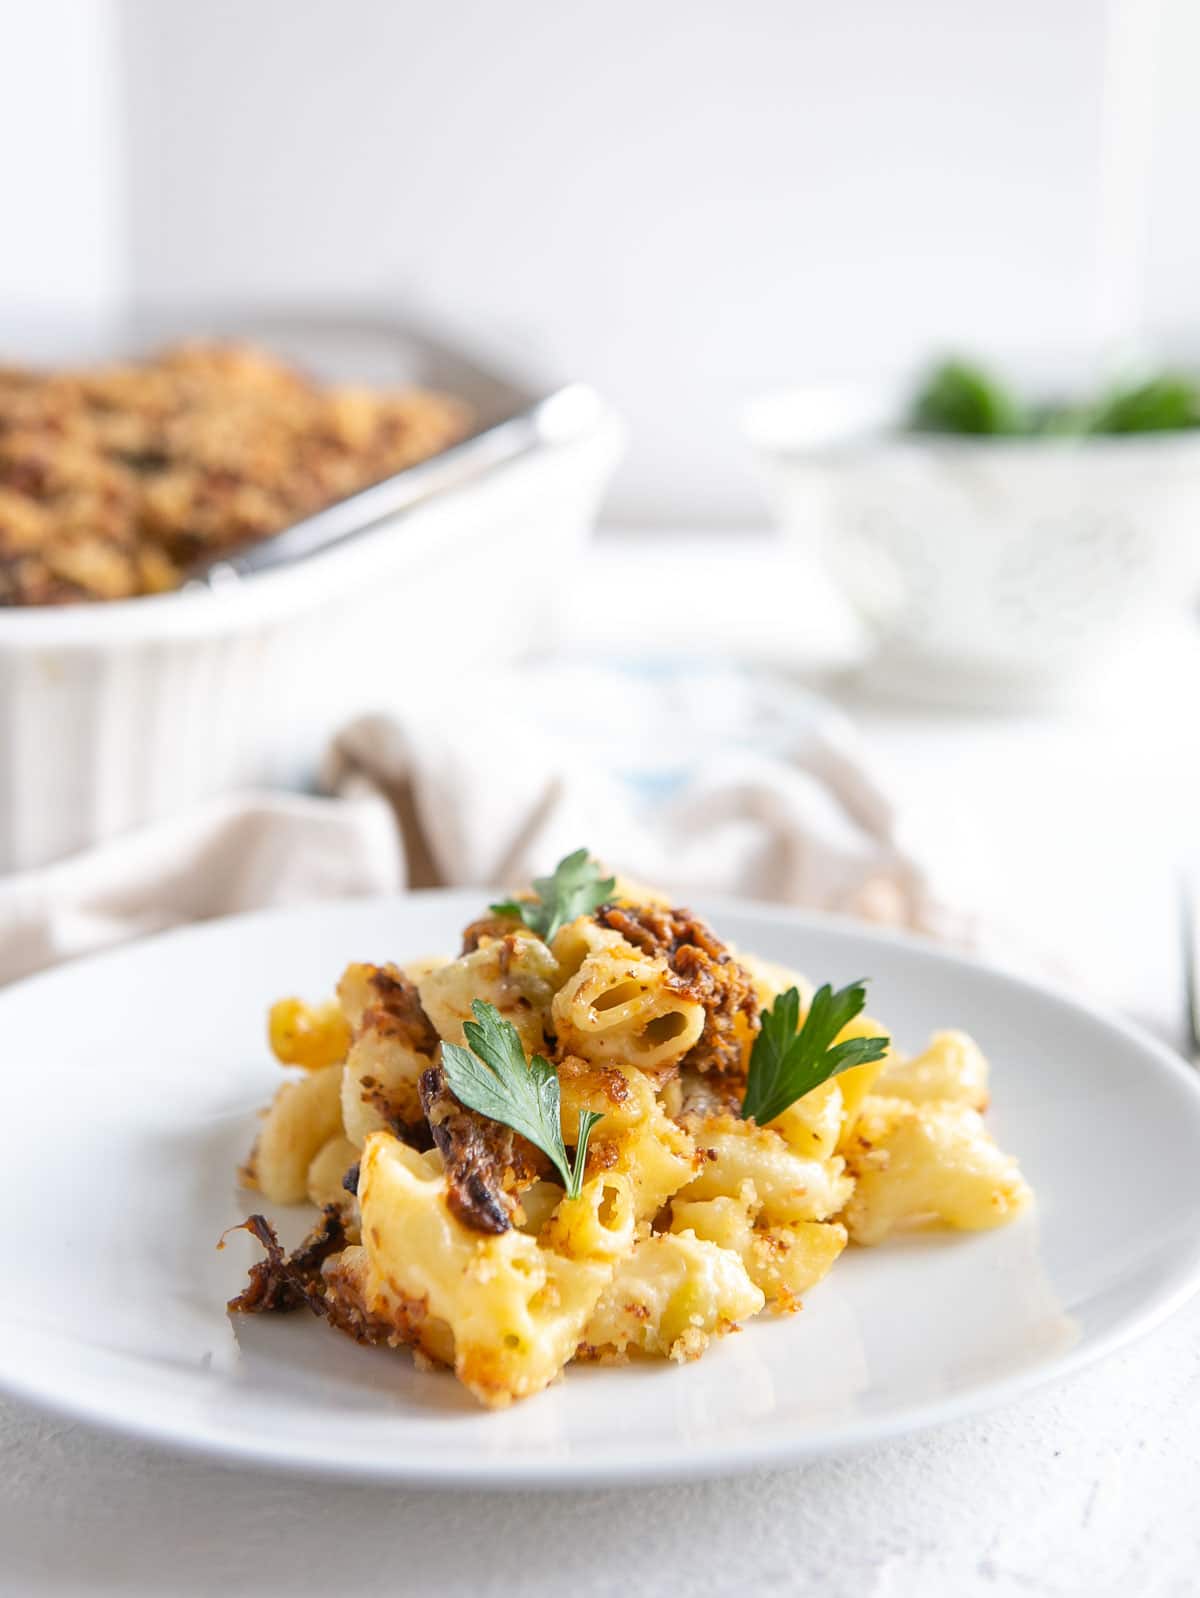 Green Chile Mac & Cheese with Texas BBQ Brisket